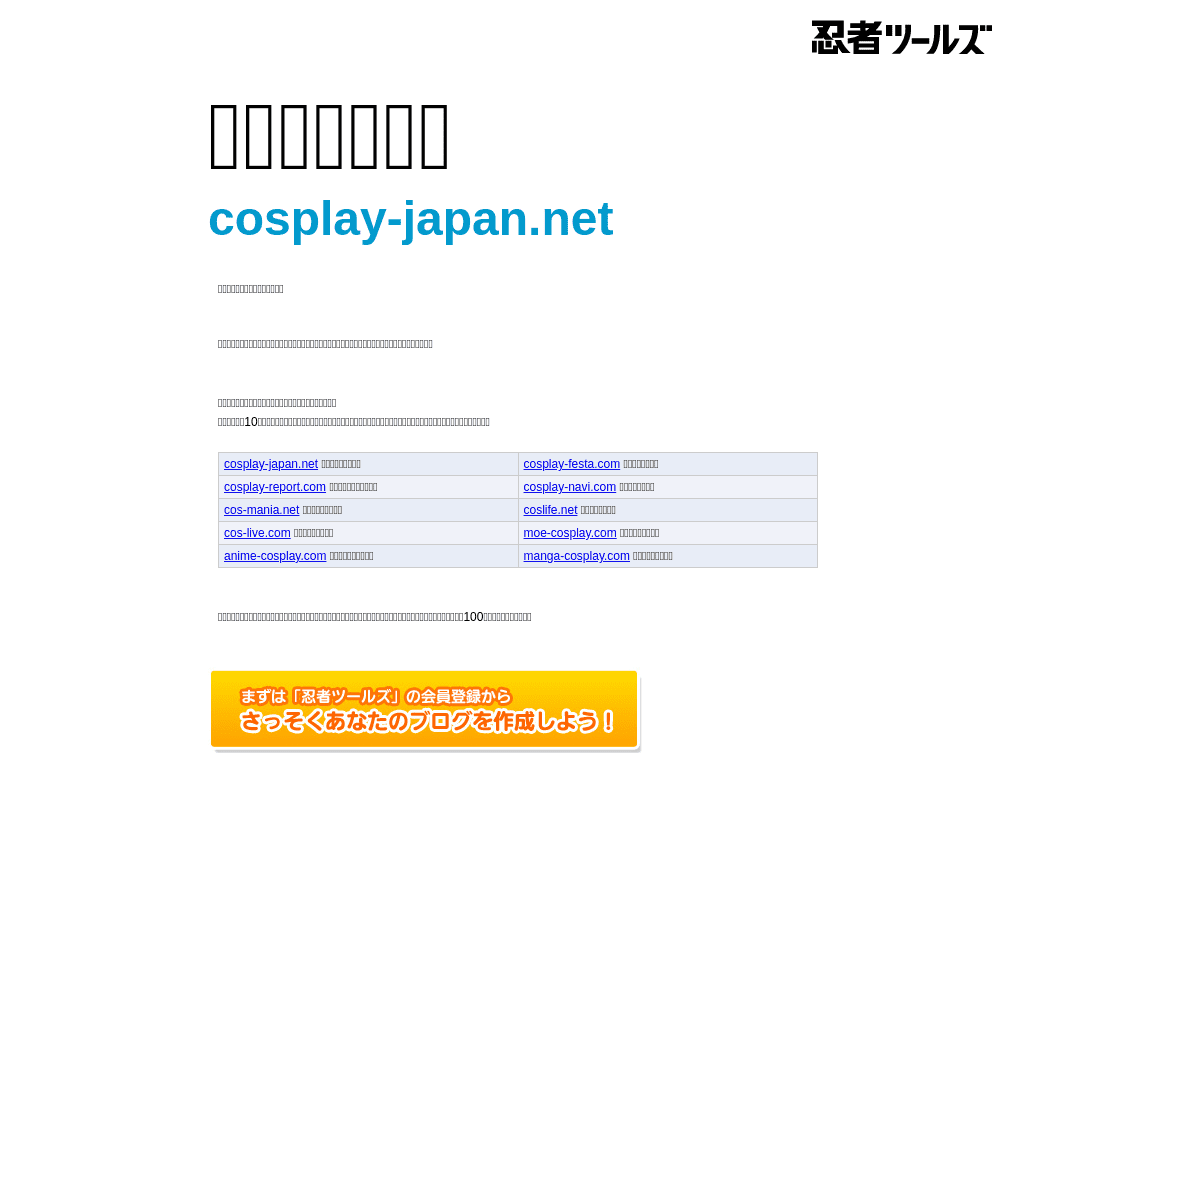 A complete backup of https://cosplay-japan.net